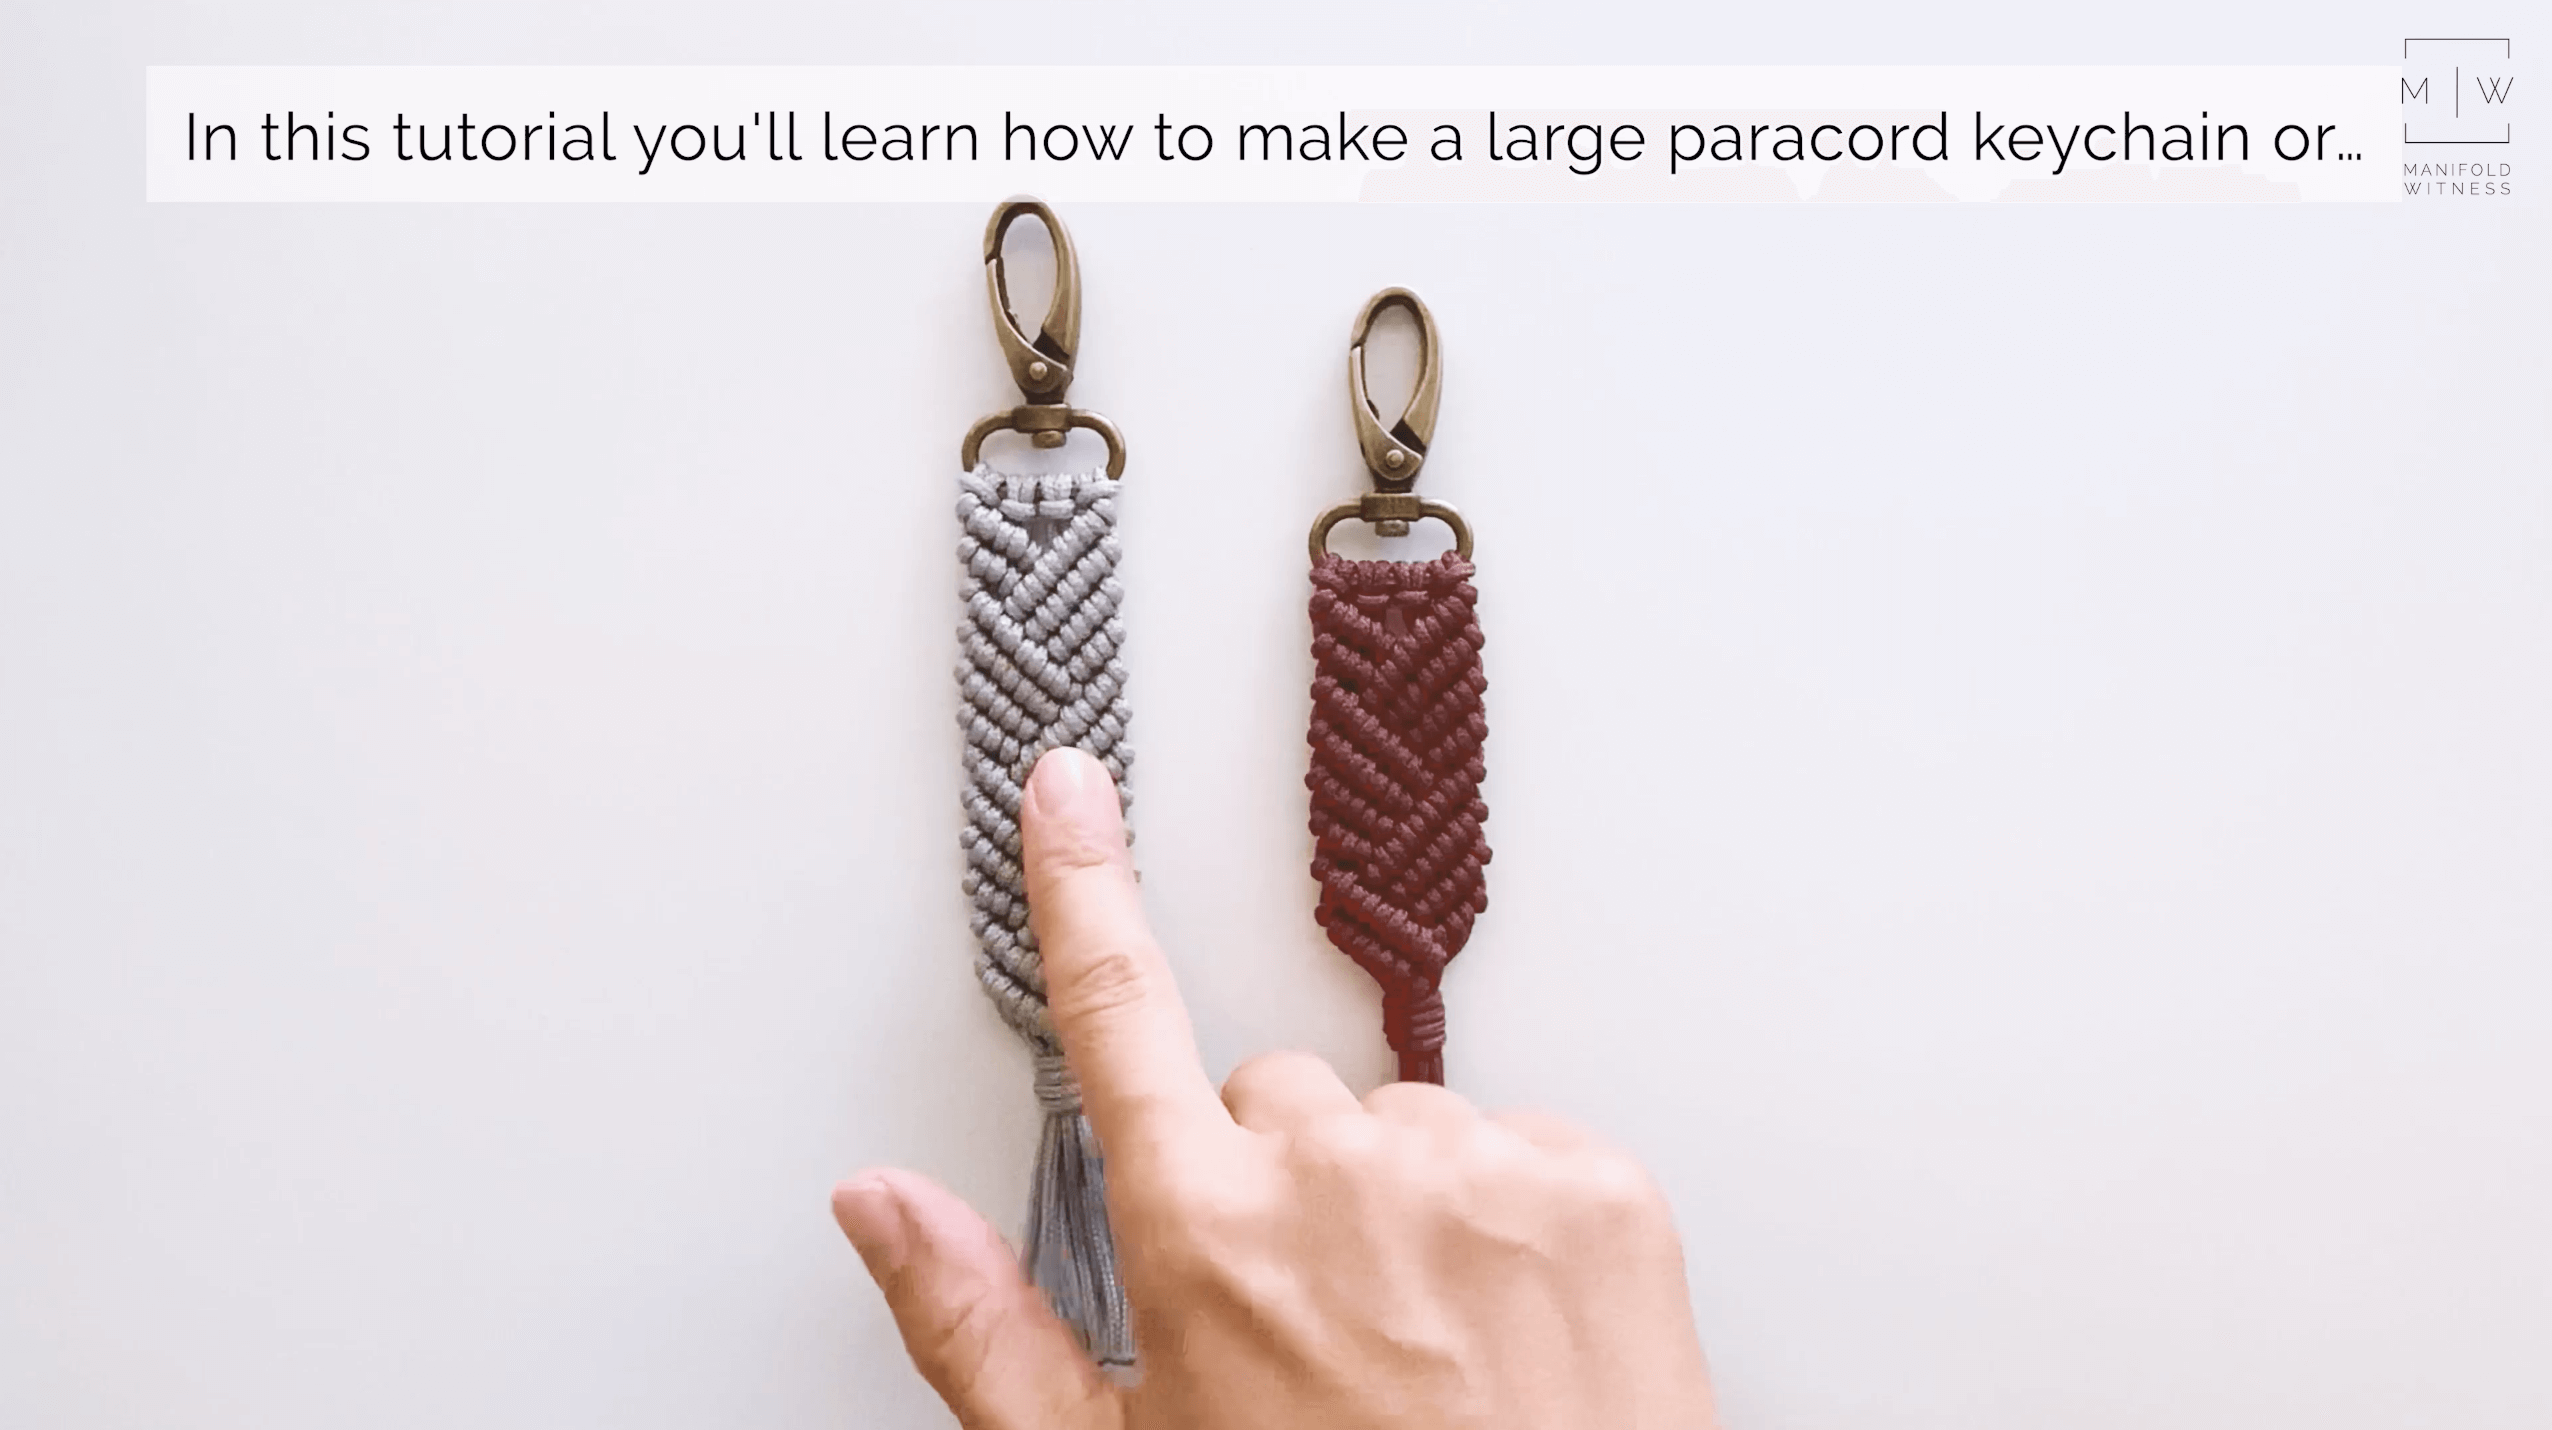 Load video: Step-by-step tutorial for making a paracord macrame keychain